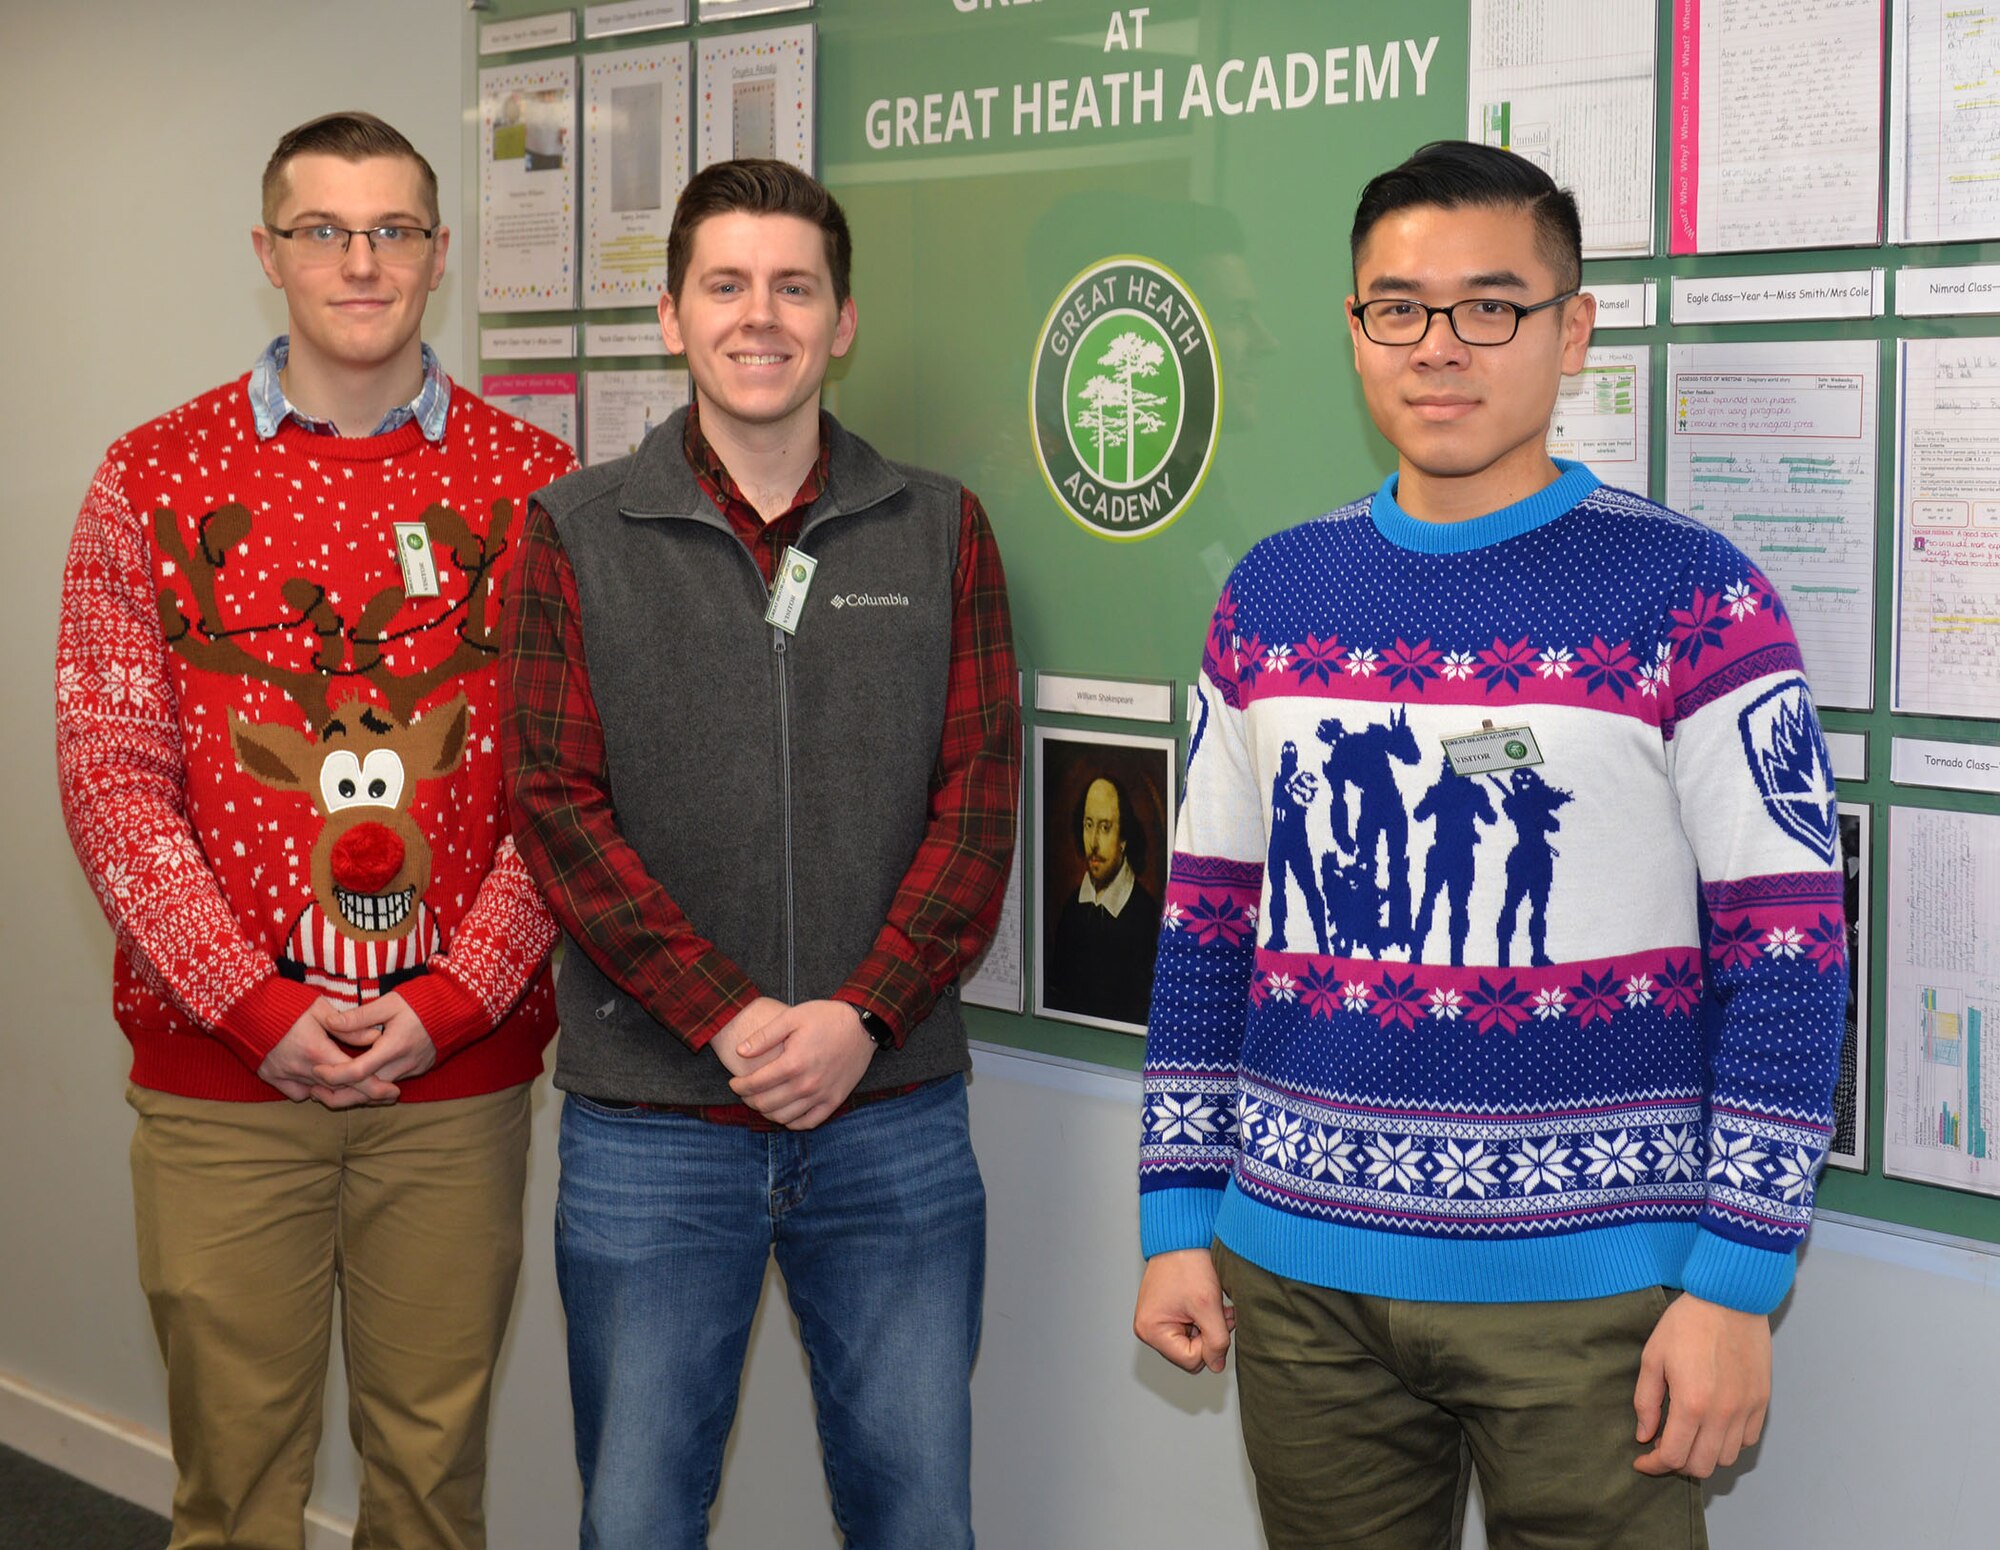 U.S. Air Force Roy Smith, Airman 1st Class Logan Westbrooks and Senior Airman Alan Deng all 100th Communications Squadron members, pose for a photo at Great Heath Academy, Mildenhall, Suffolk, before “Radio Santa” Dec. 18, 2018. Radio Santa is a program run by 100th CS Airmen from RAF Mildenhall, which provides young local school children the opportunity to talk to Santa Claus. The Airmen also visited children at Beck Row Primary Academy. (U.S. Air Force photo by Karen Abeyasekere)